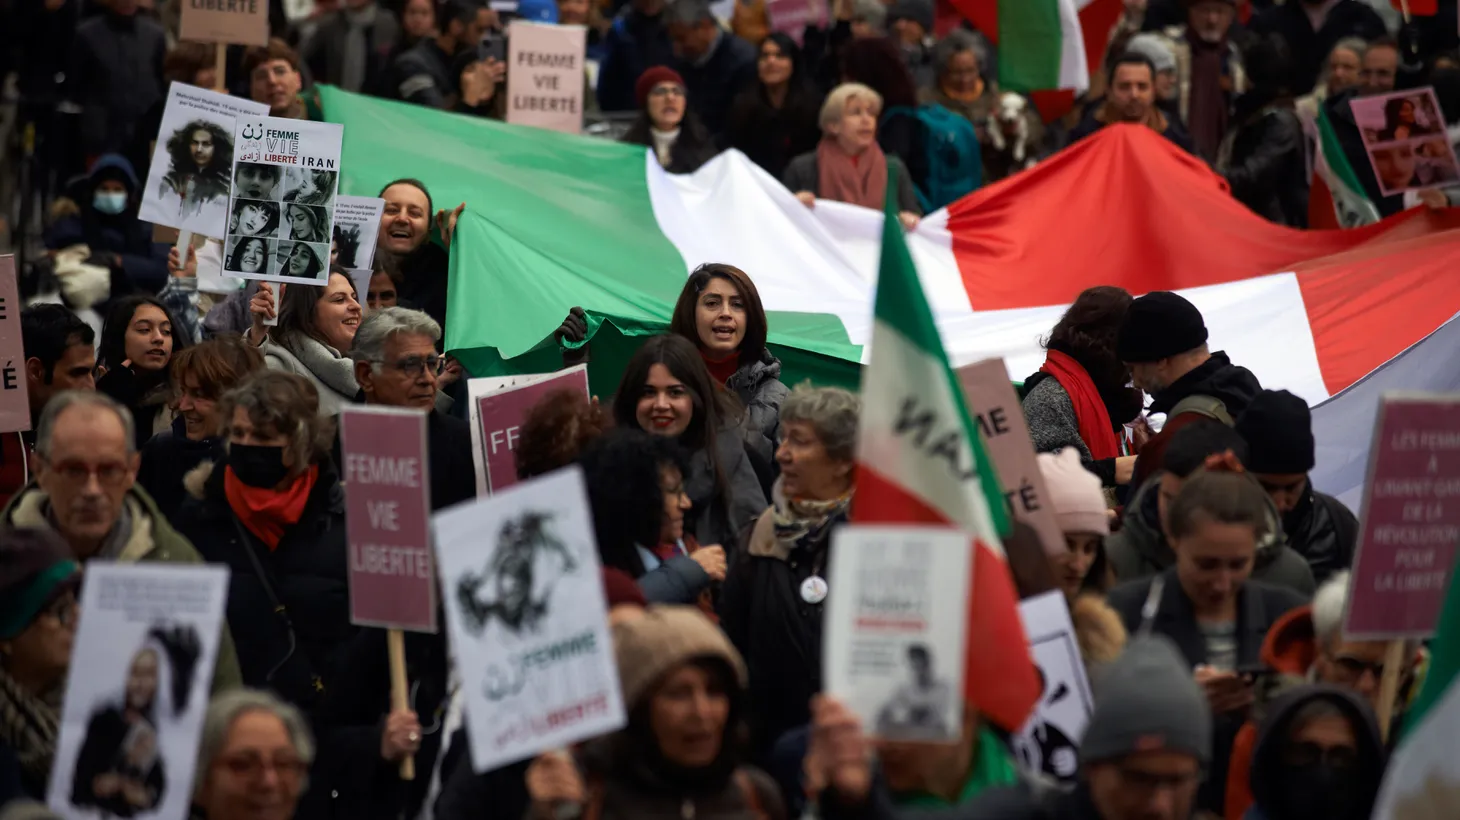 Protesters wave a giant Iranian flag, December 3 2022. Iranians of Toulouse organized a protest in solidarity with women in Iran, following the death of Mahsa Amini, who died after being arrested by the Islamic republic's “morality police.”